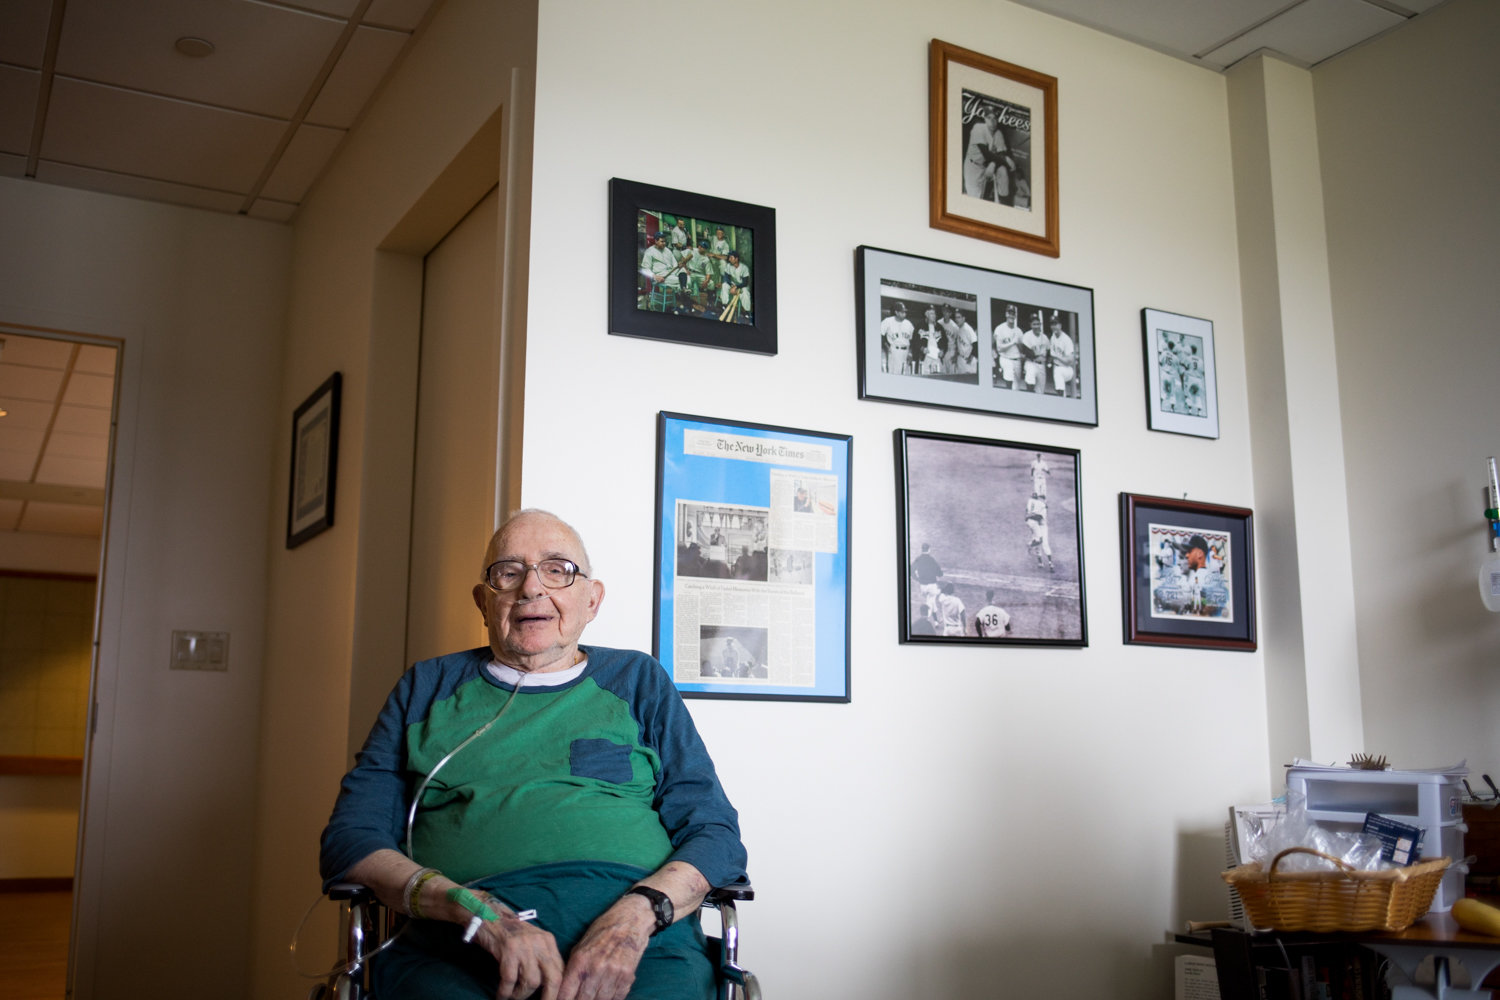 The wall in Alfred Schwartz’s room at the Hebrew Home at Riverdale was adorned with images of the New York Yankees, a team he loved his entire life. He was honored for his service in World War II at Yankee Stadium in 2018 — a moment he shared with his daughters Heidi and Gayle, who are now grieving for him following his death from complications related to COVID-19.